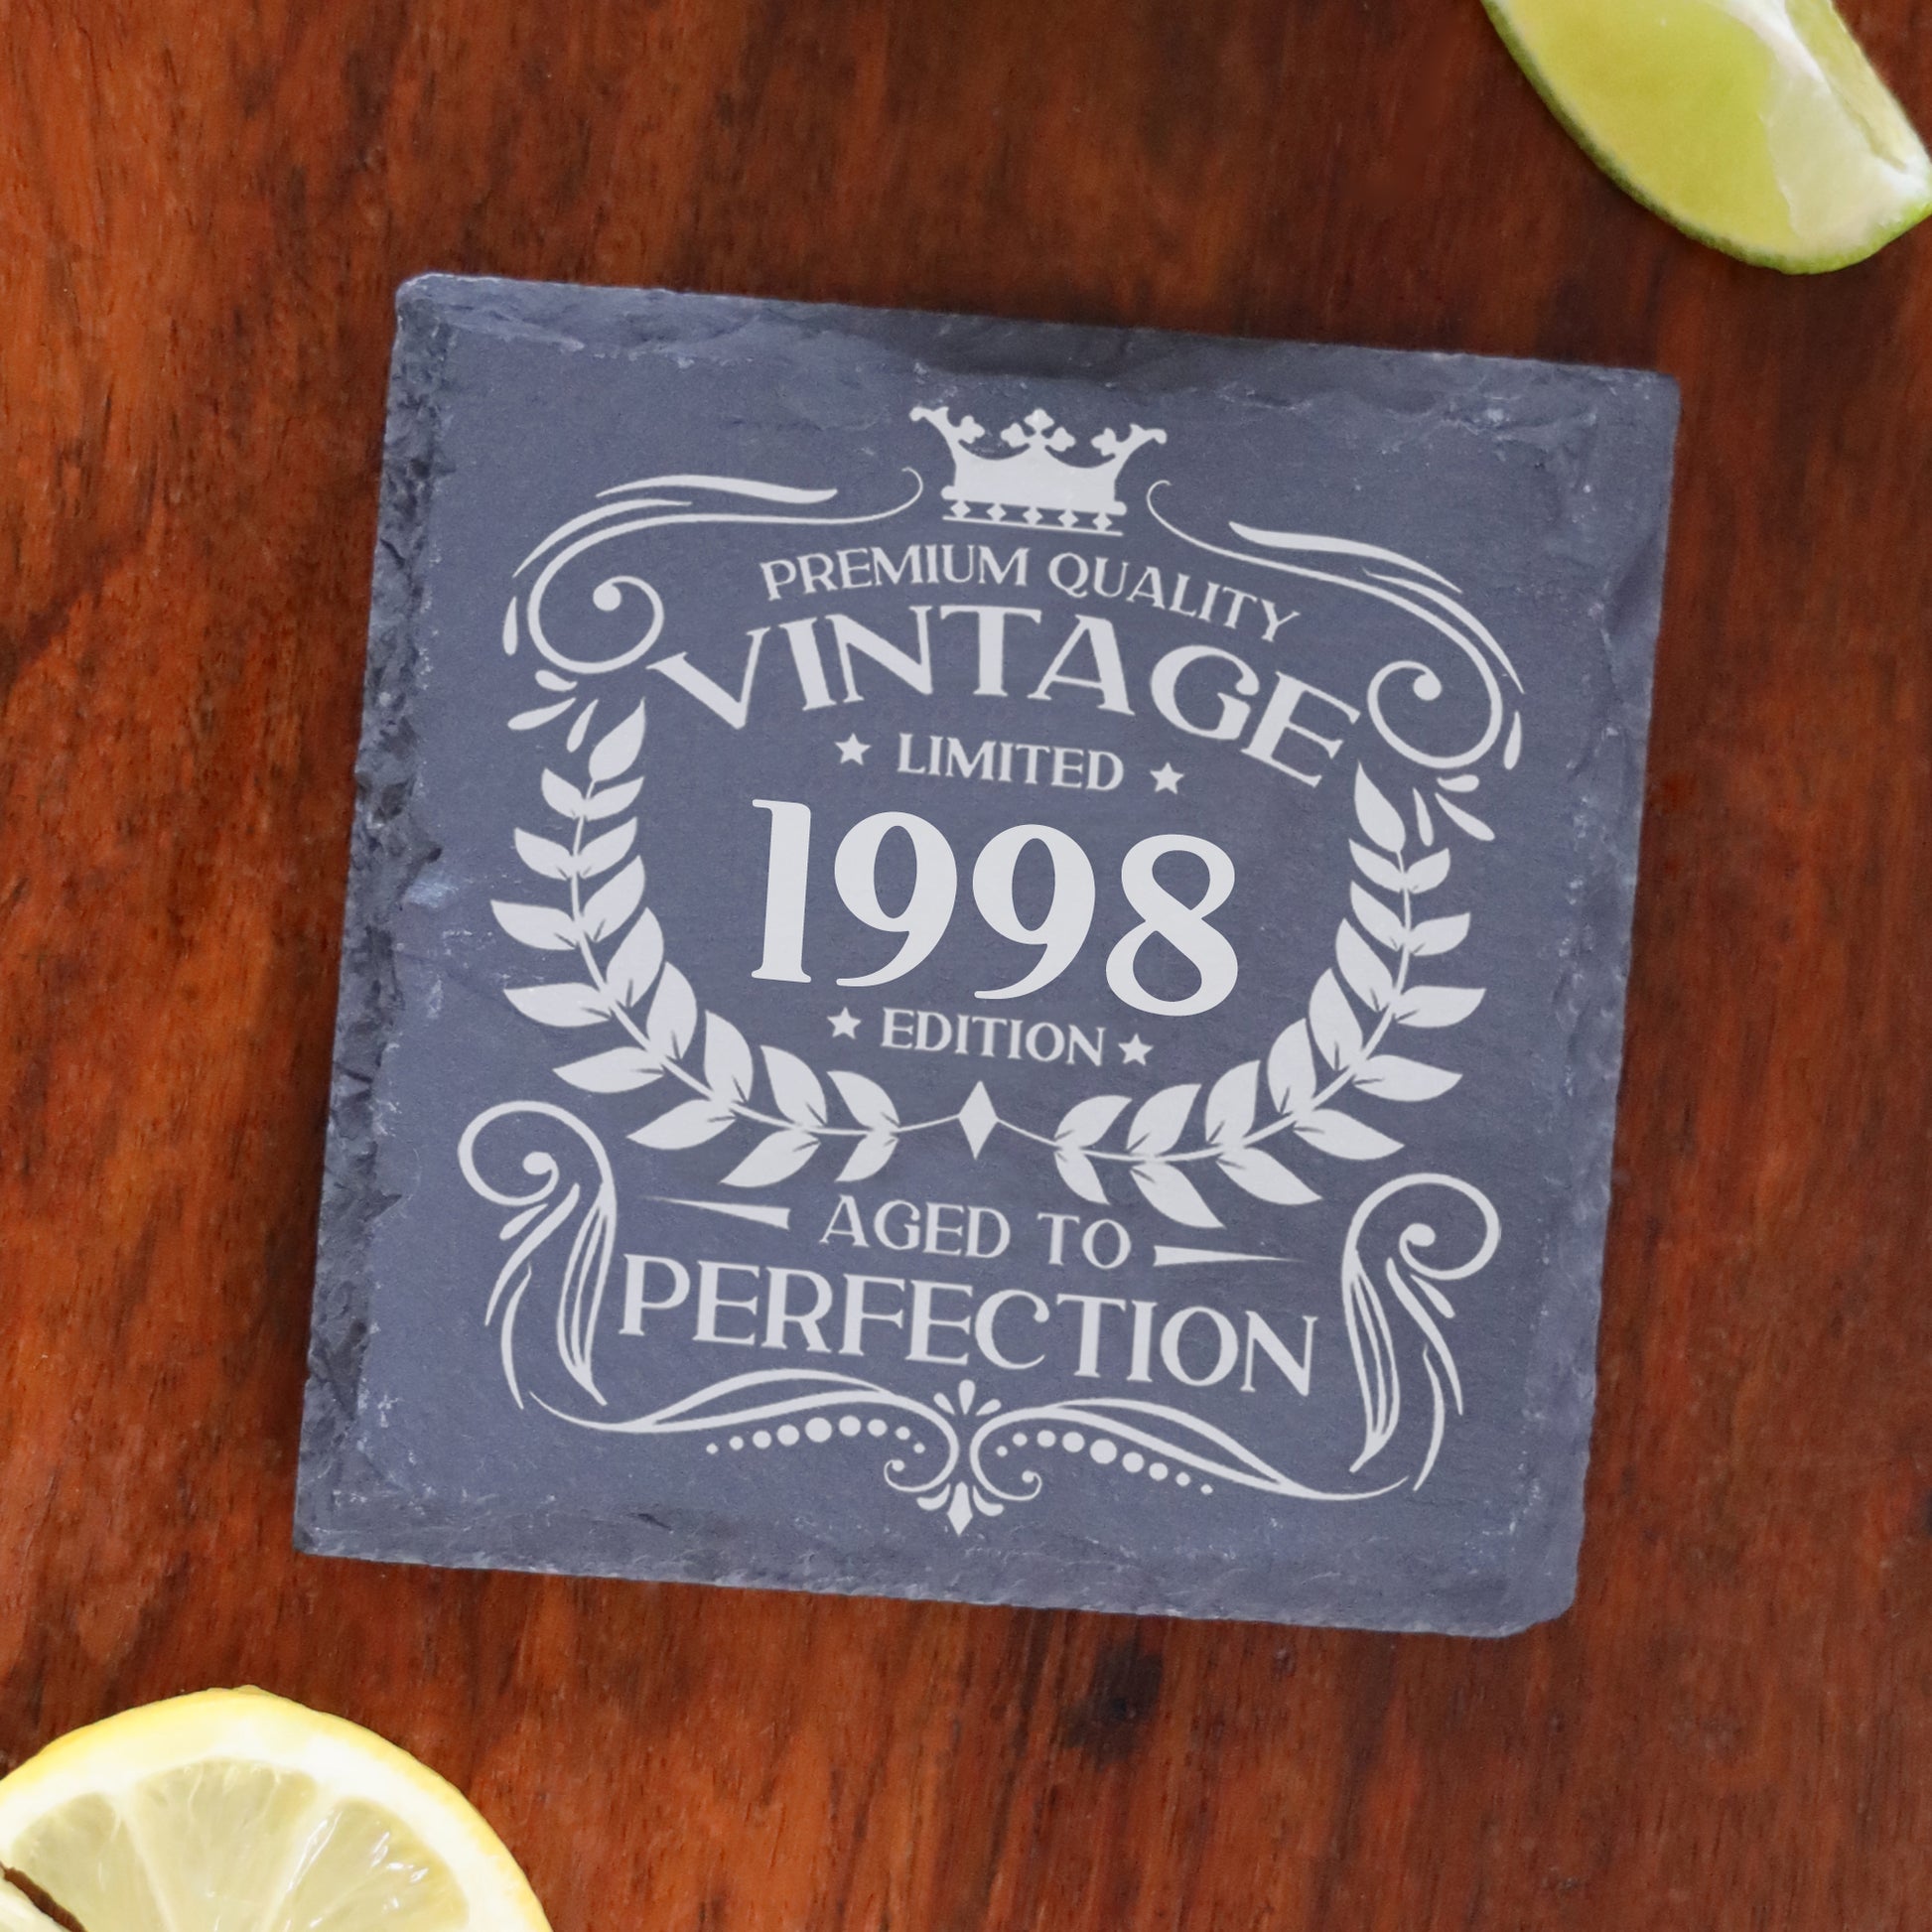 Personalised Vintage 1998 Mug and/or Coaster  - Always Looking Good - Square Coaster On Its Own  